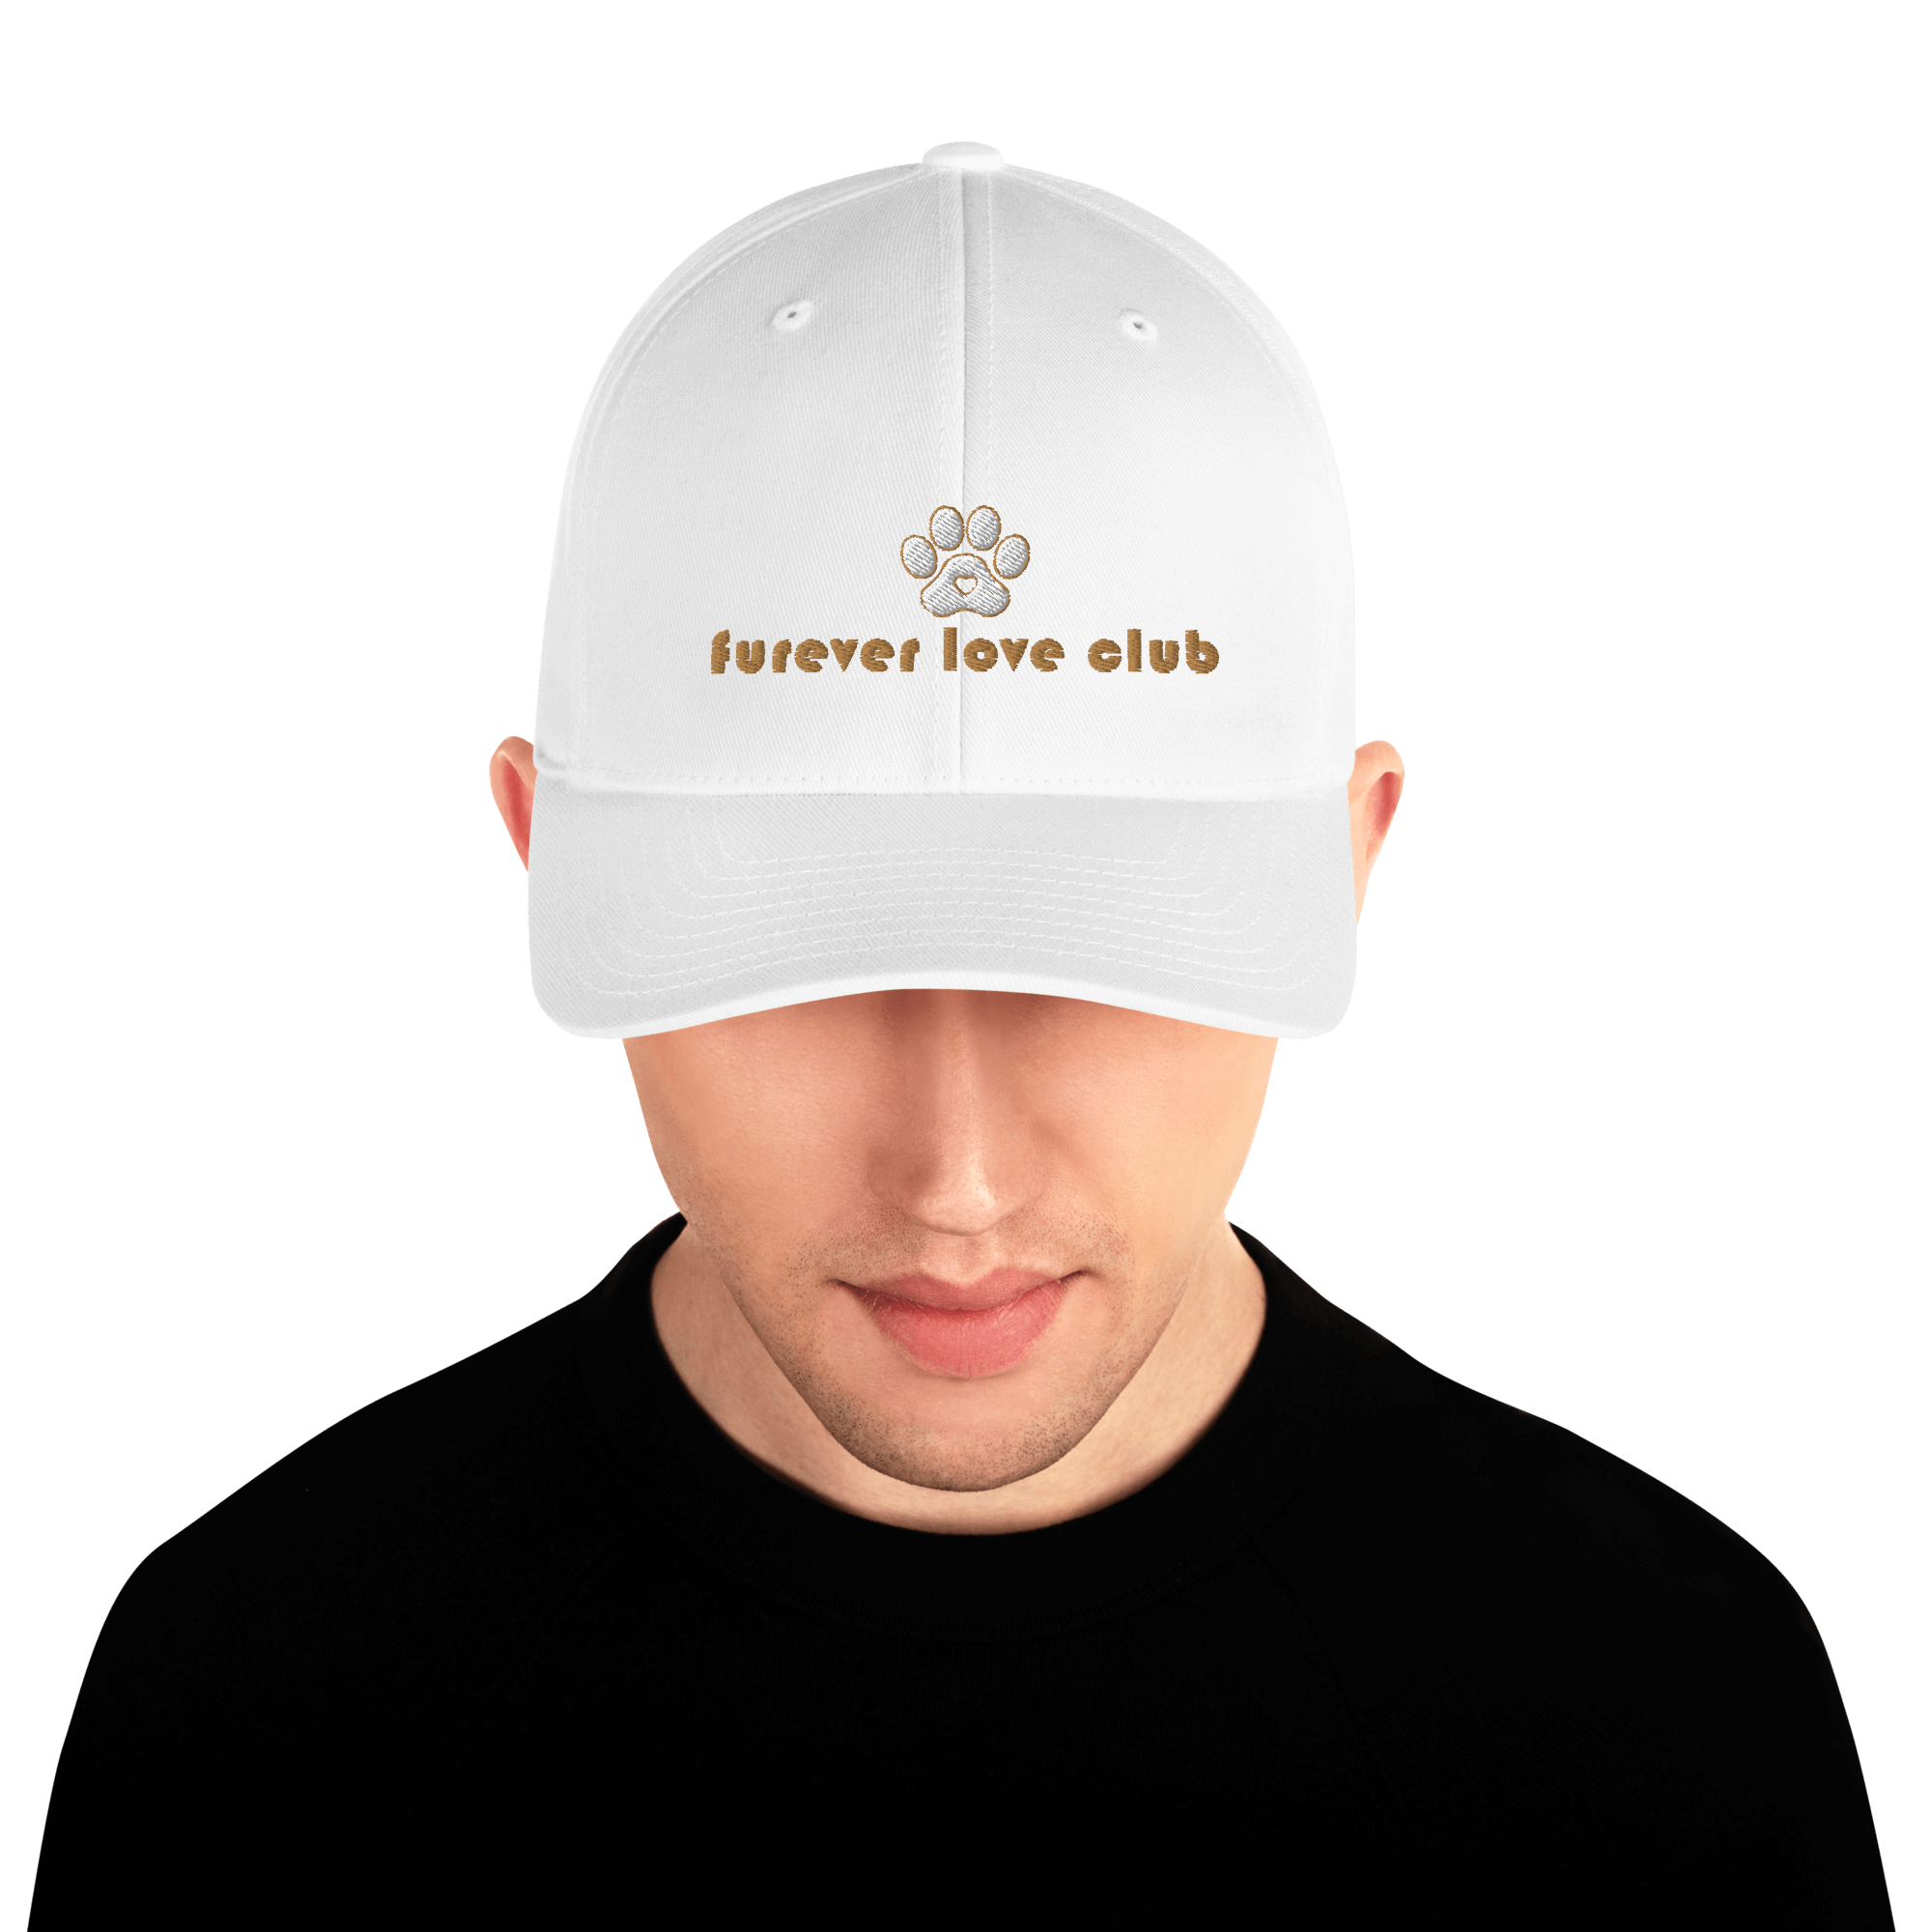 8283-closed-back-structured-cap-white-front-623b4bc4ce3d1-1.png